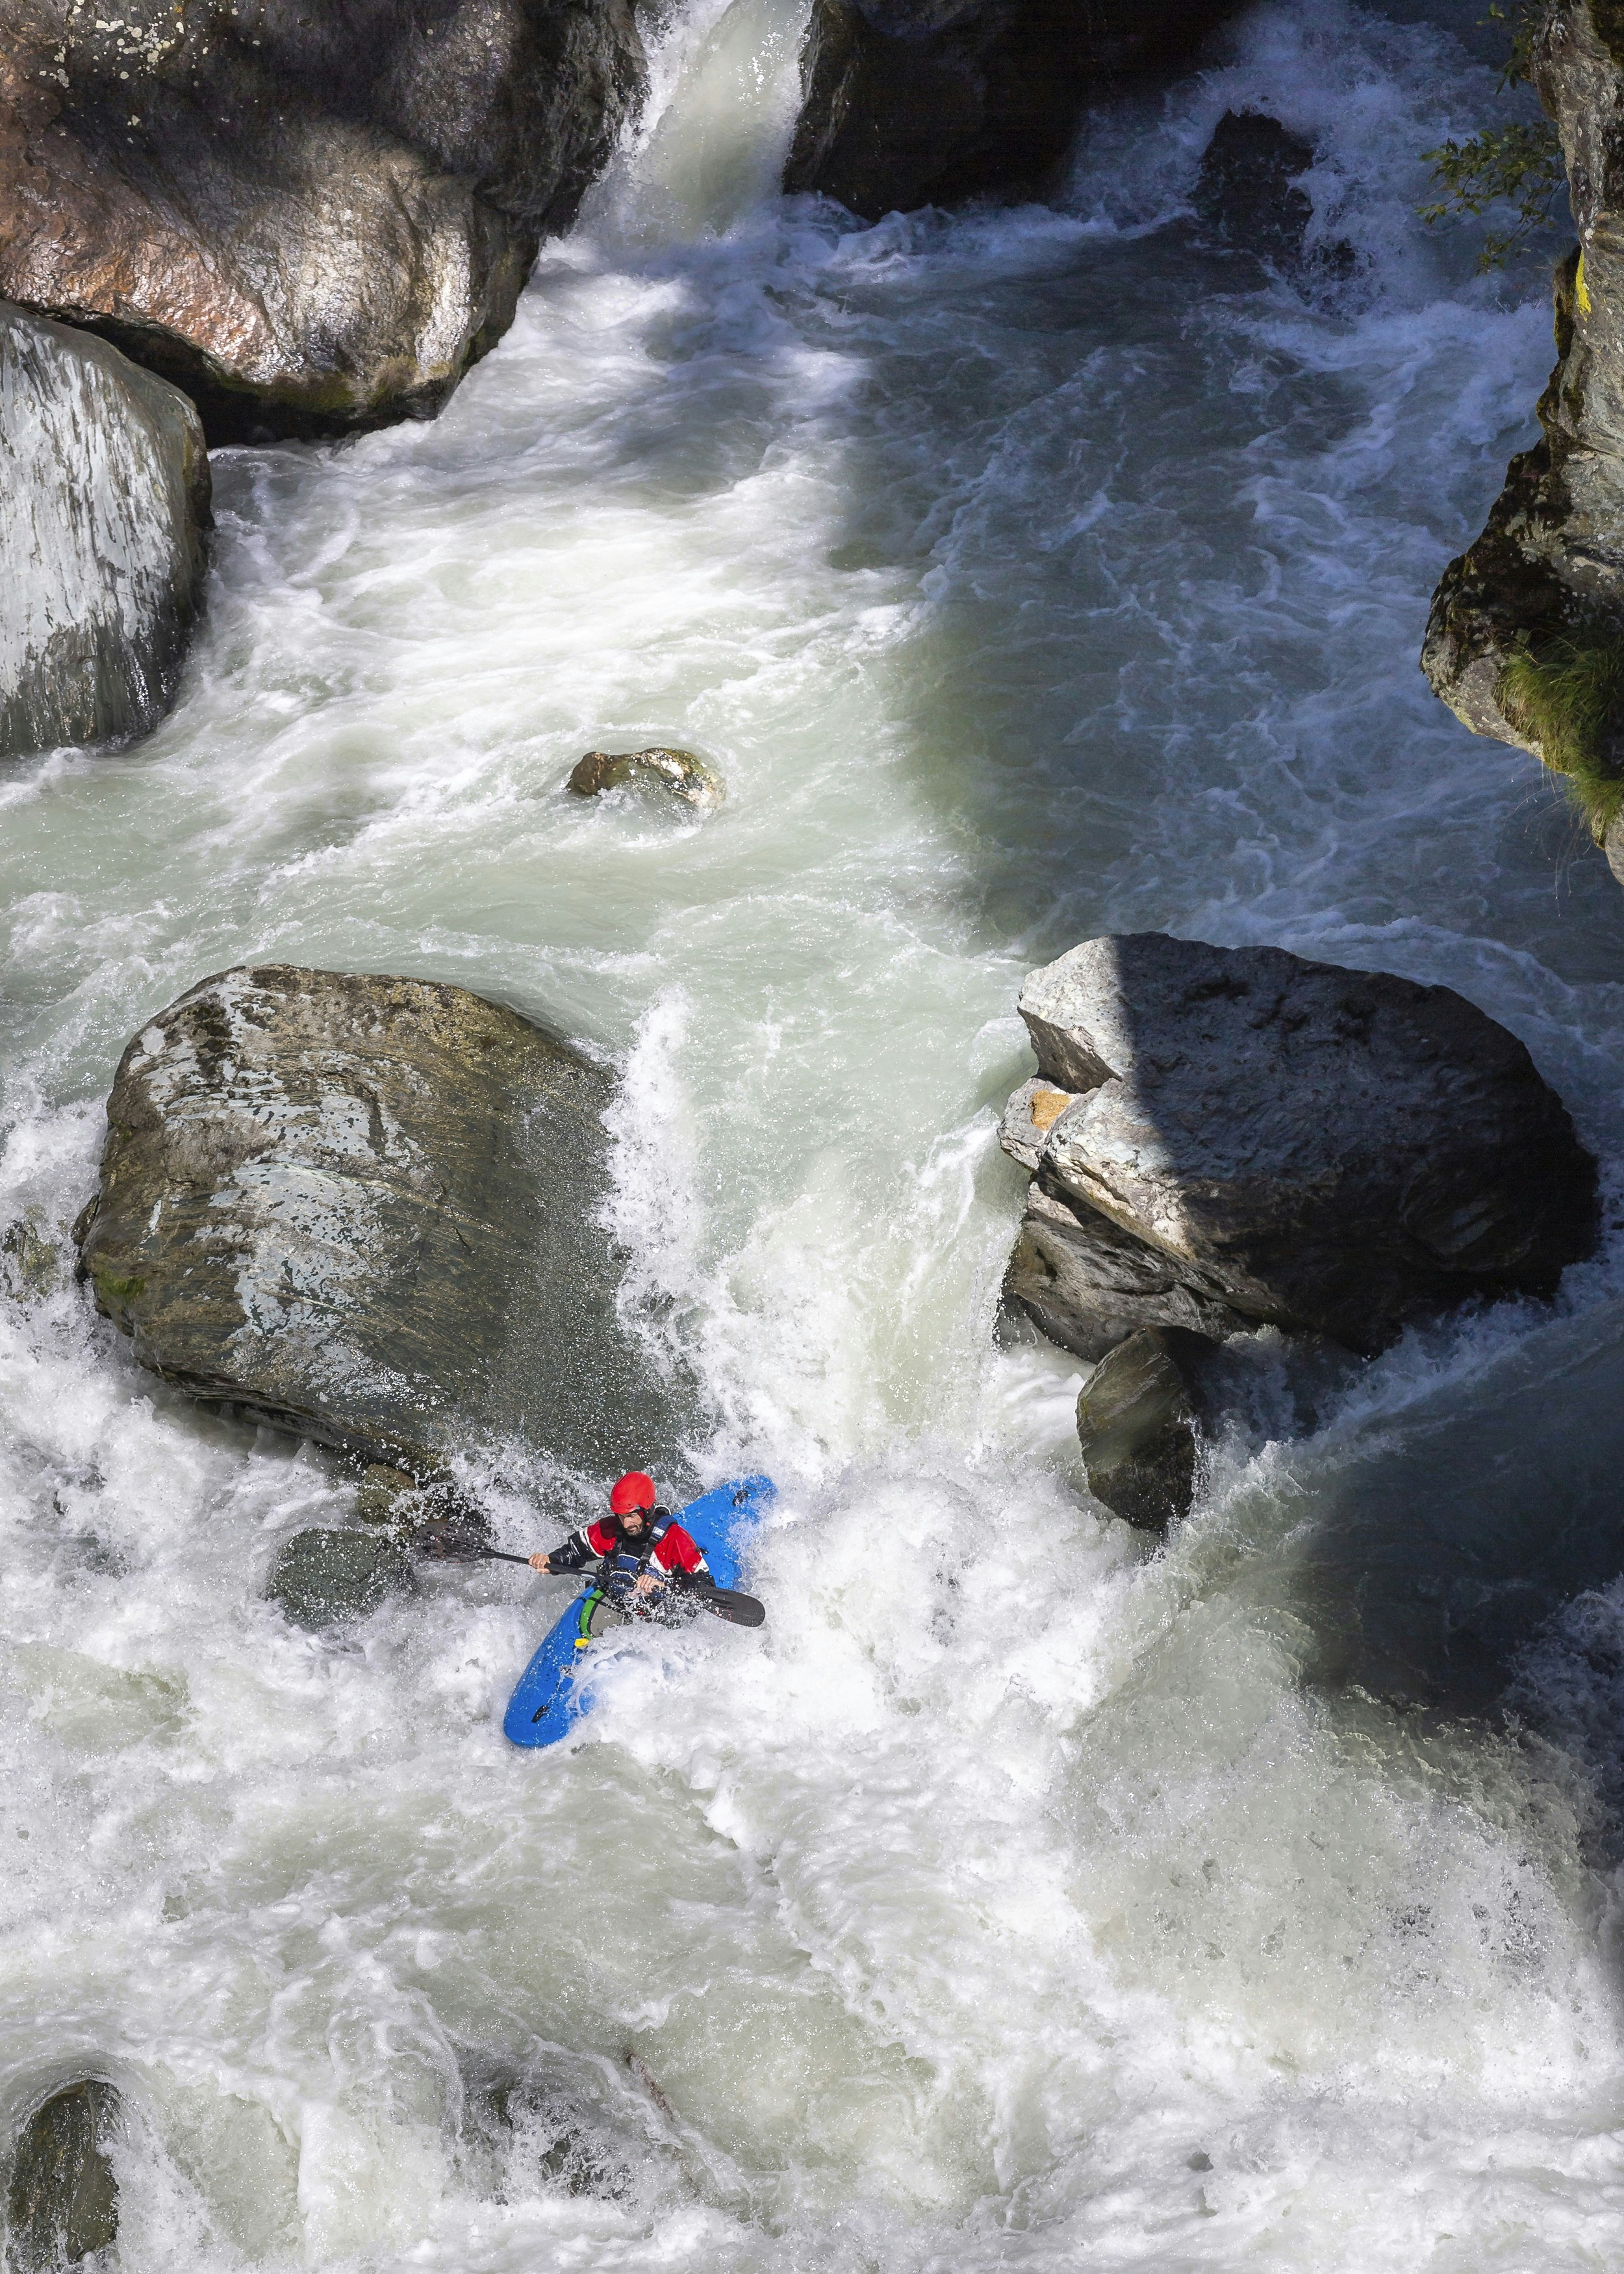 Vertical shot of a male athlete running whitewater rapids in Austria; the water is frothing as it cuts between a series of large boulders in the river.